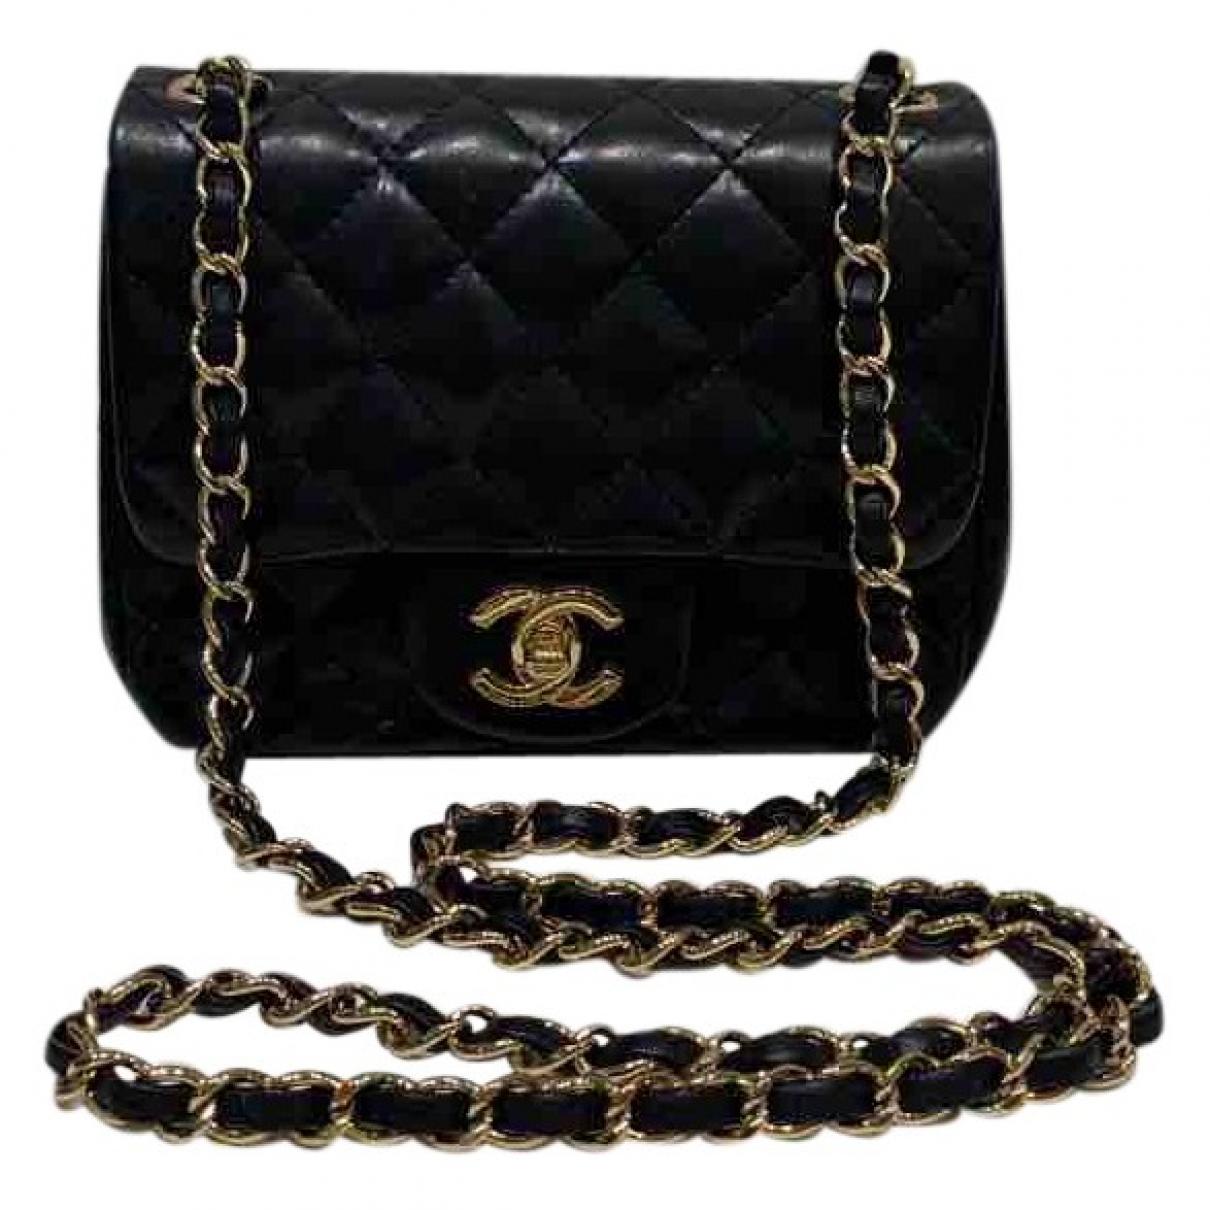 Chanel Timeless/classique Leather Crossbody Bag in Black - Lyst